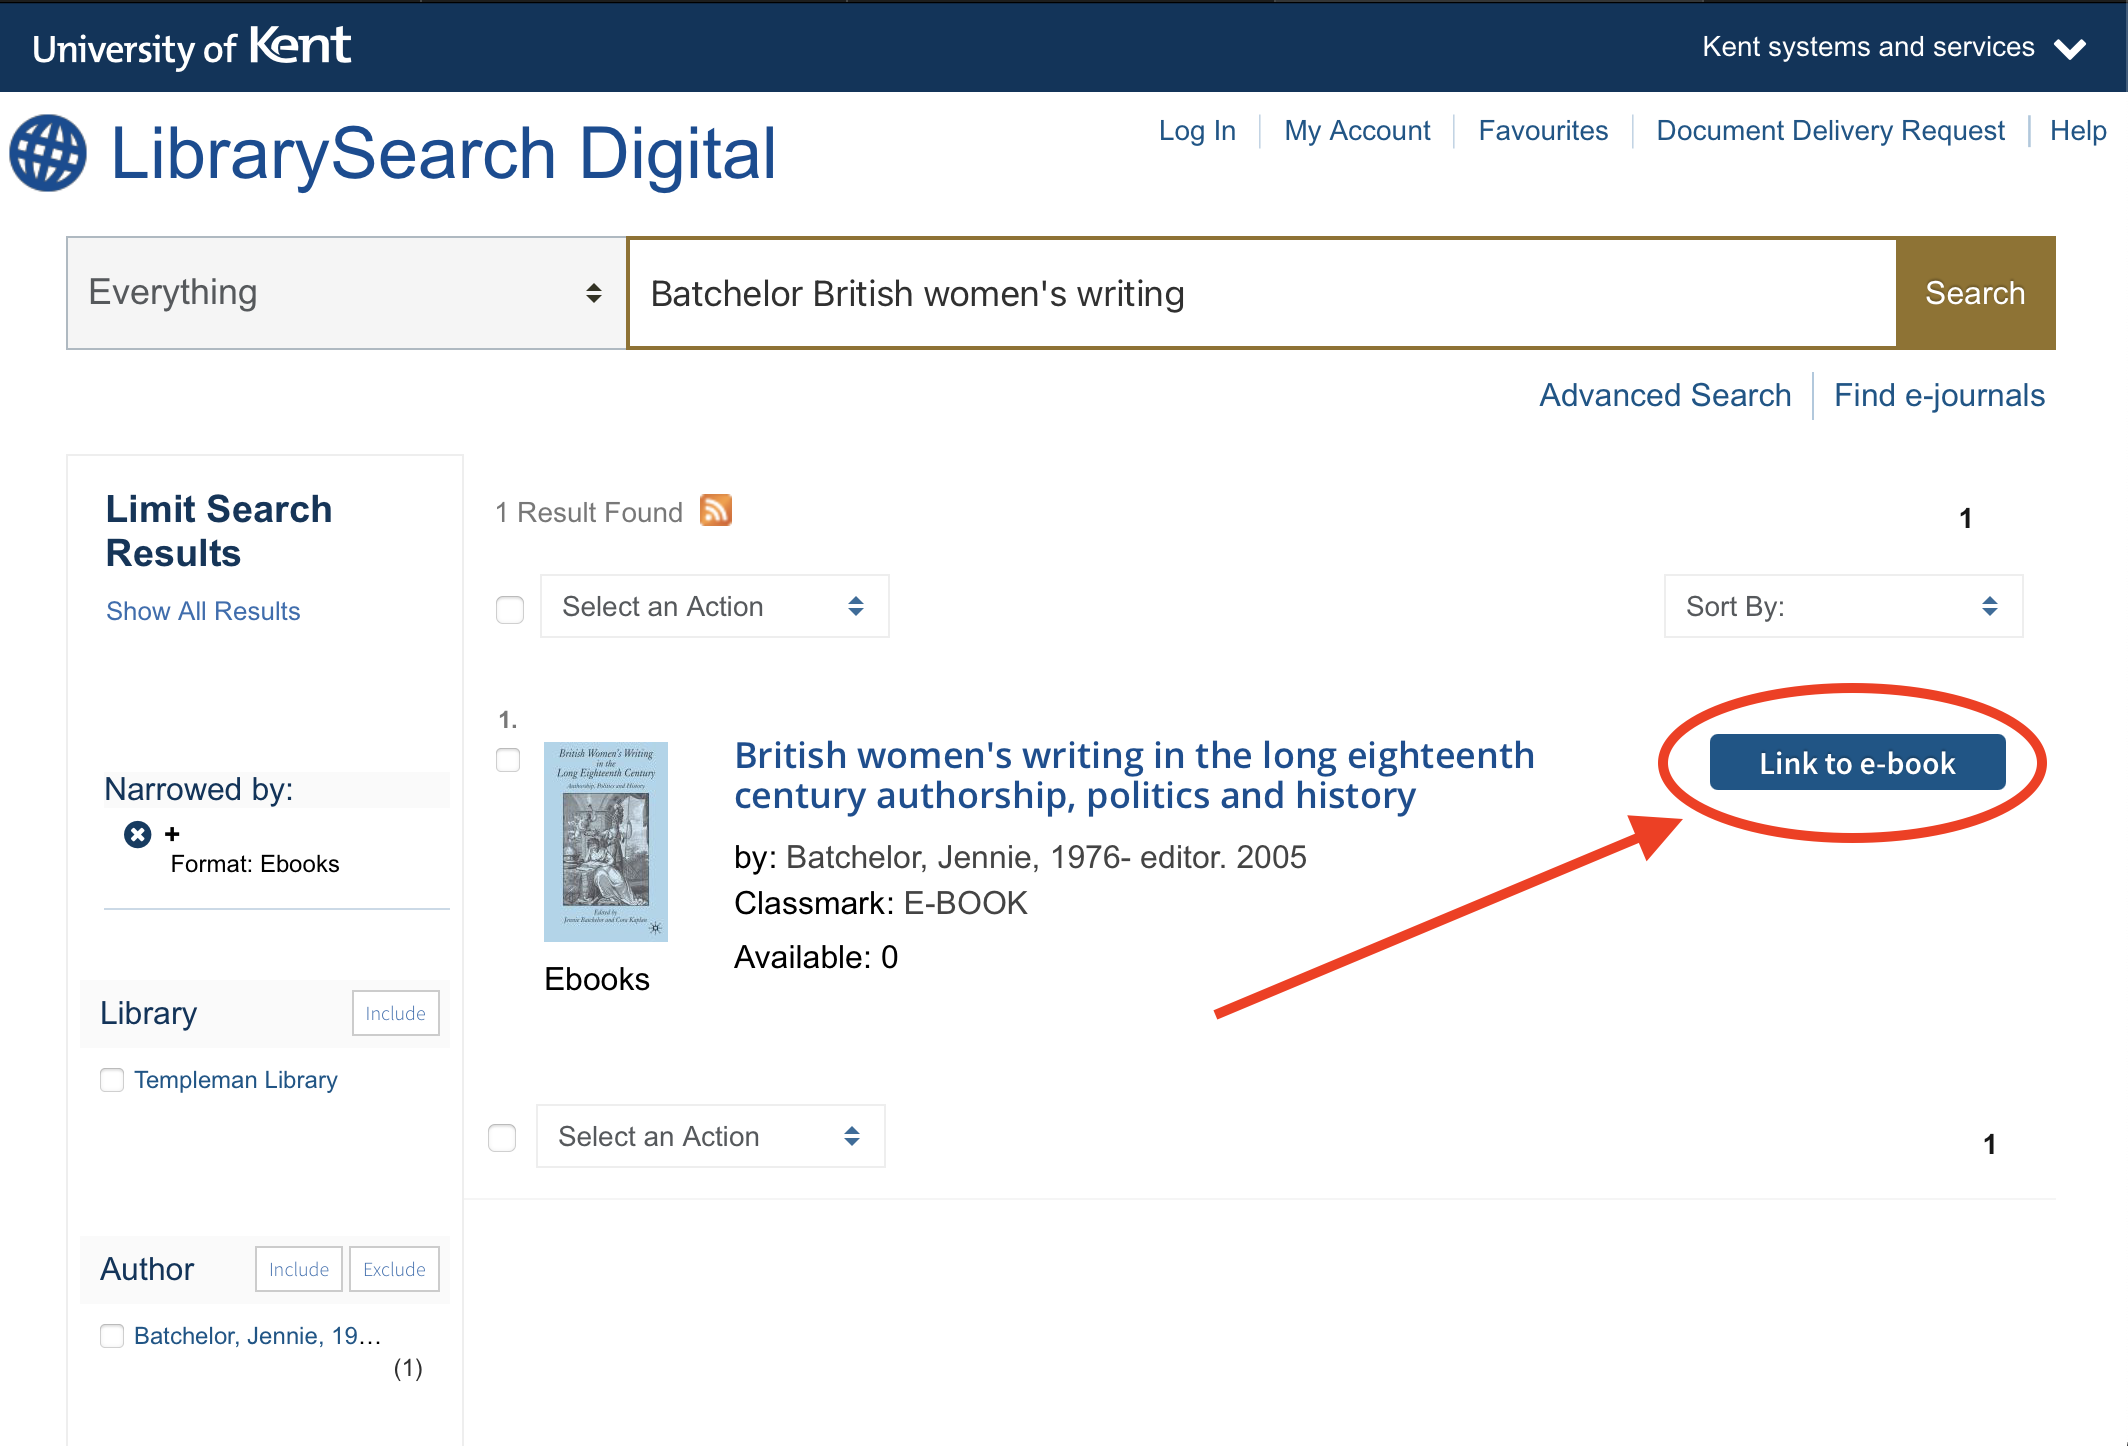 Screenshot of Library Search Digital results page indicating where to find link to e-book